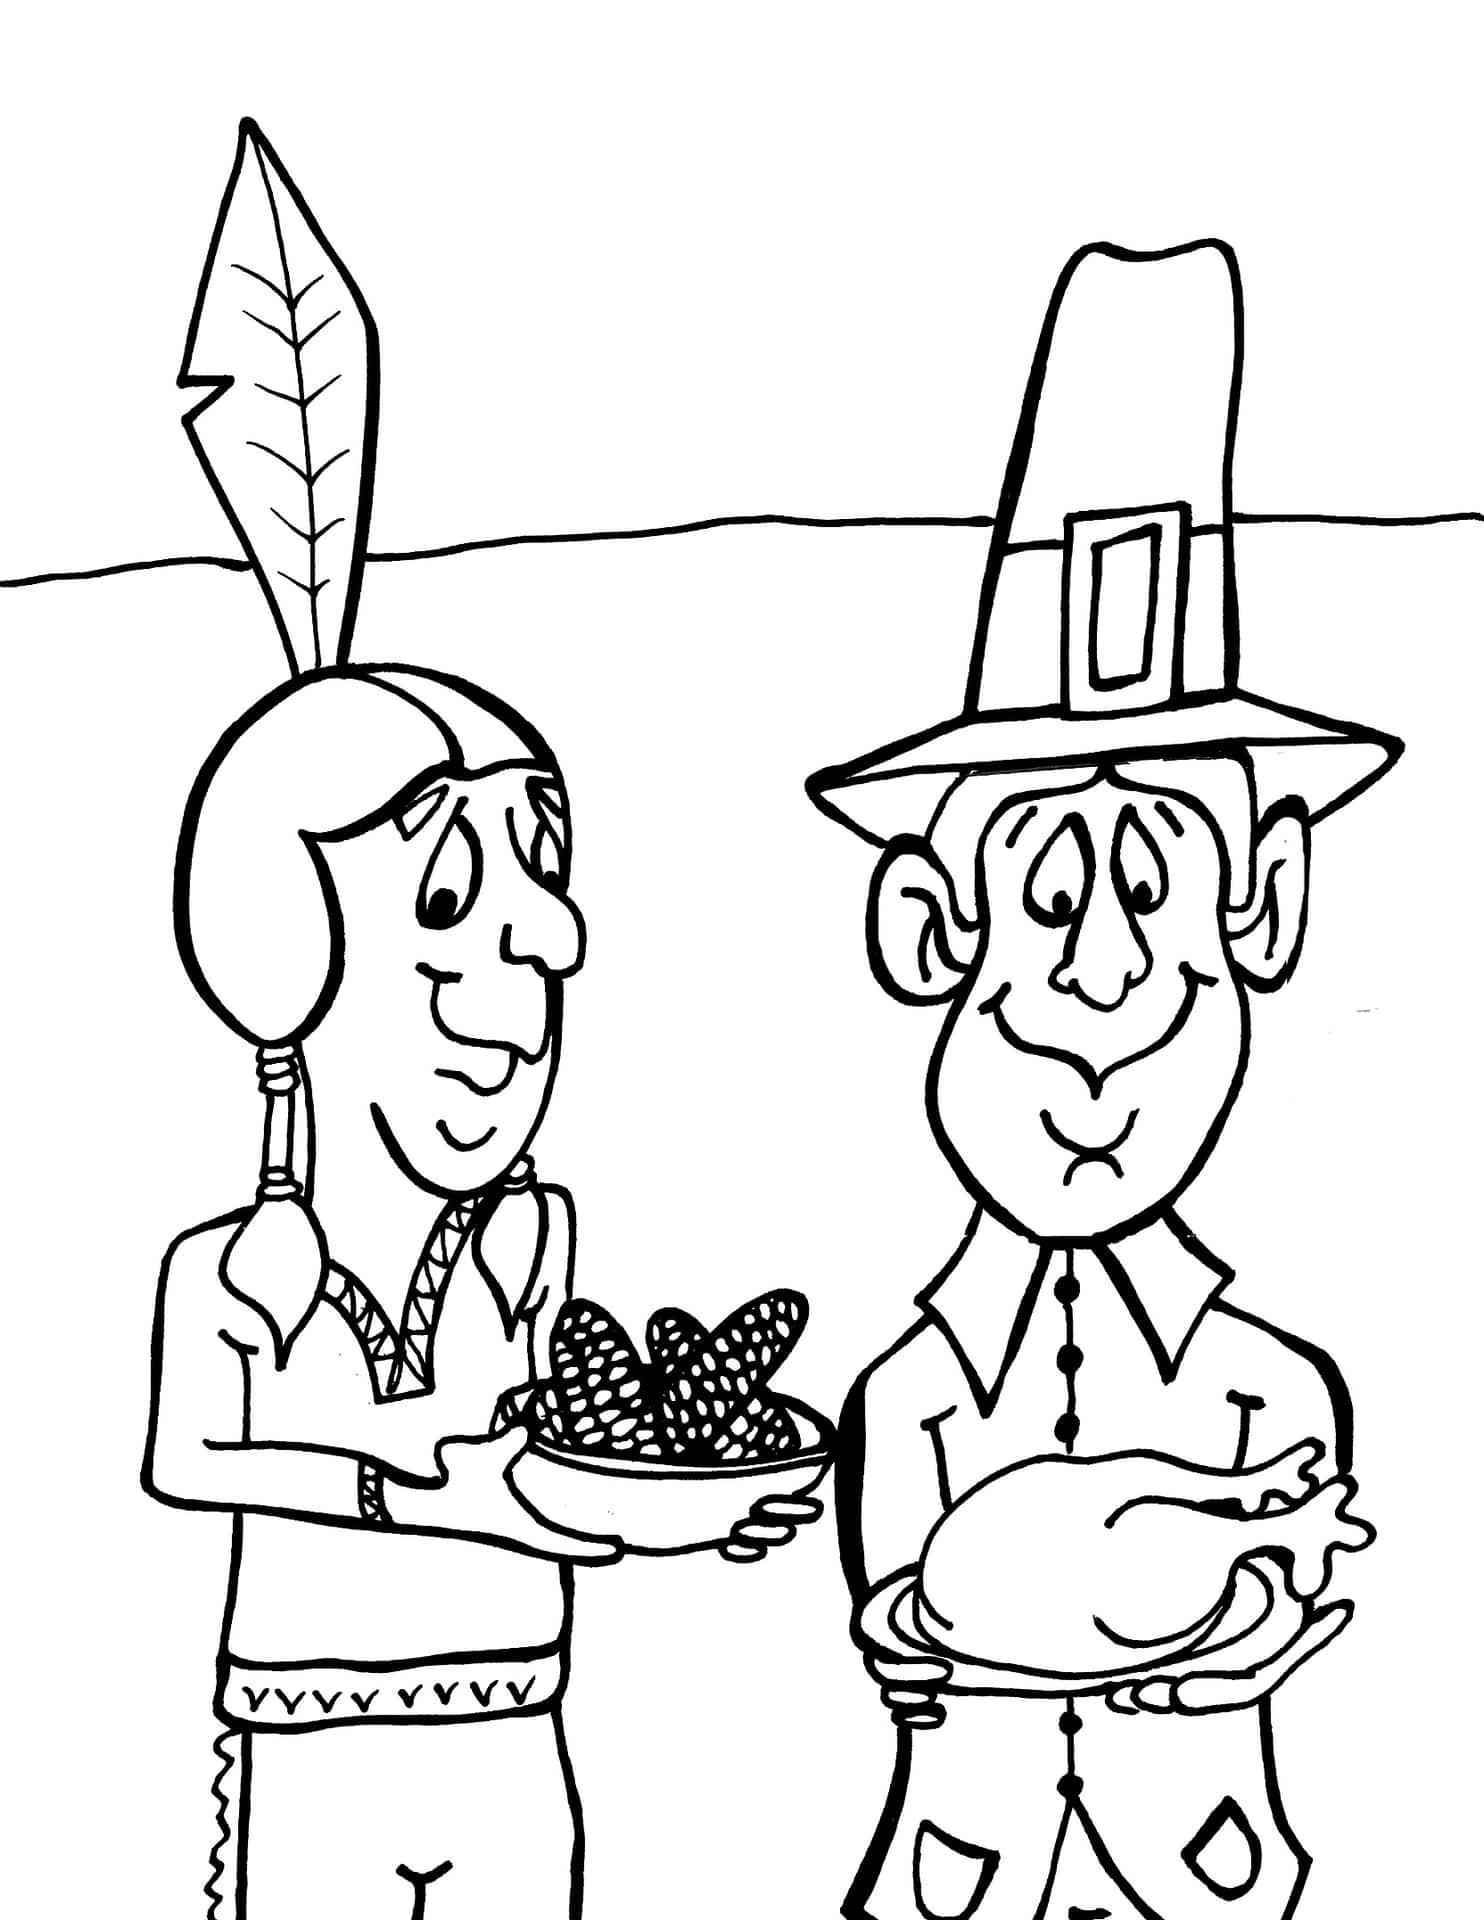 Turkey with autumn leaves, a beautiful Thanksgiving coloring picture